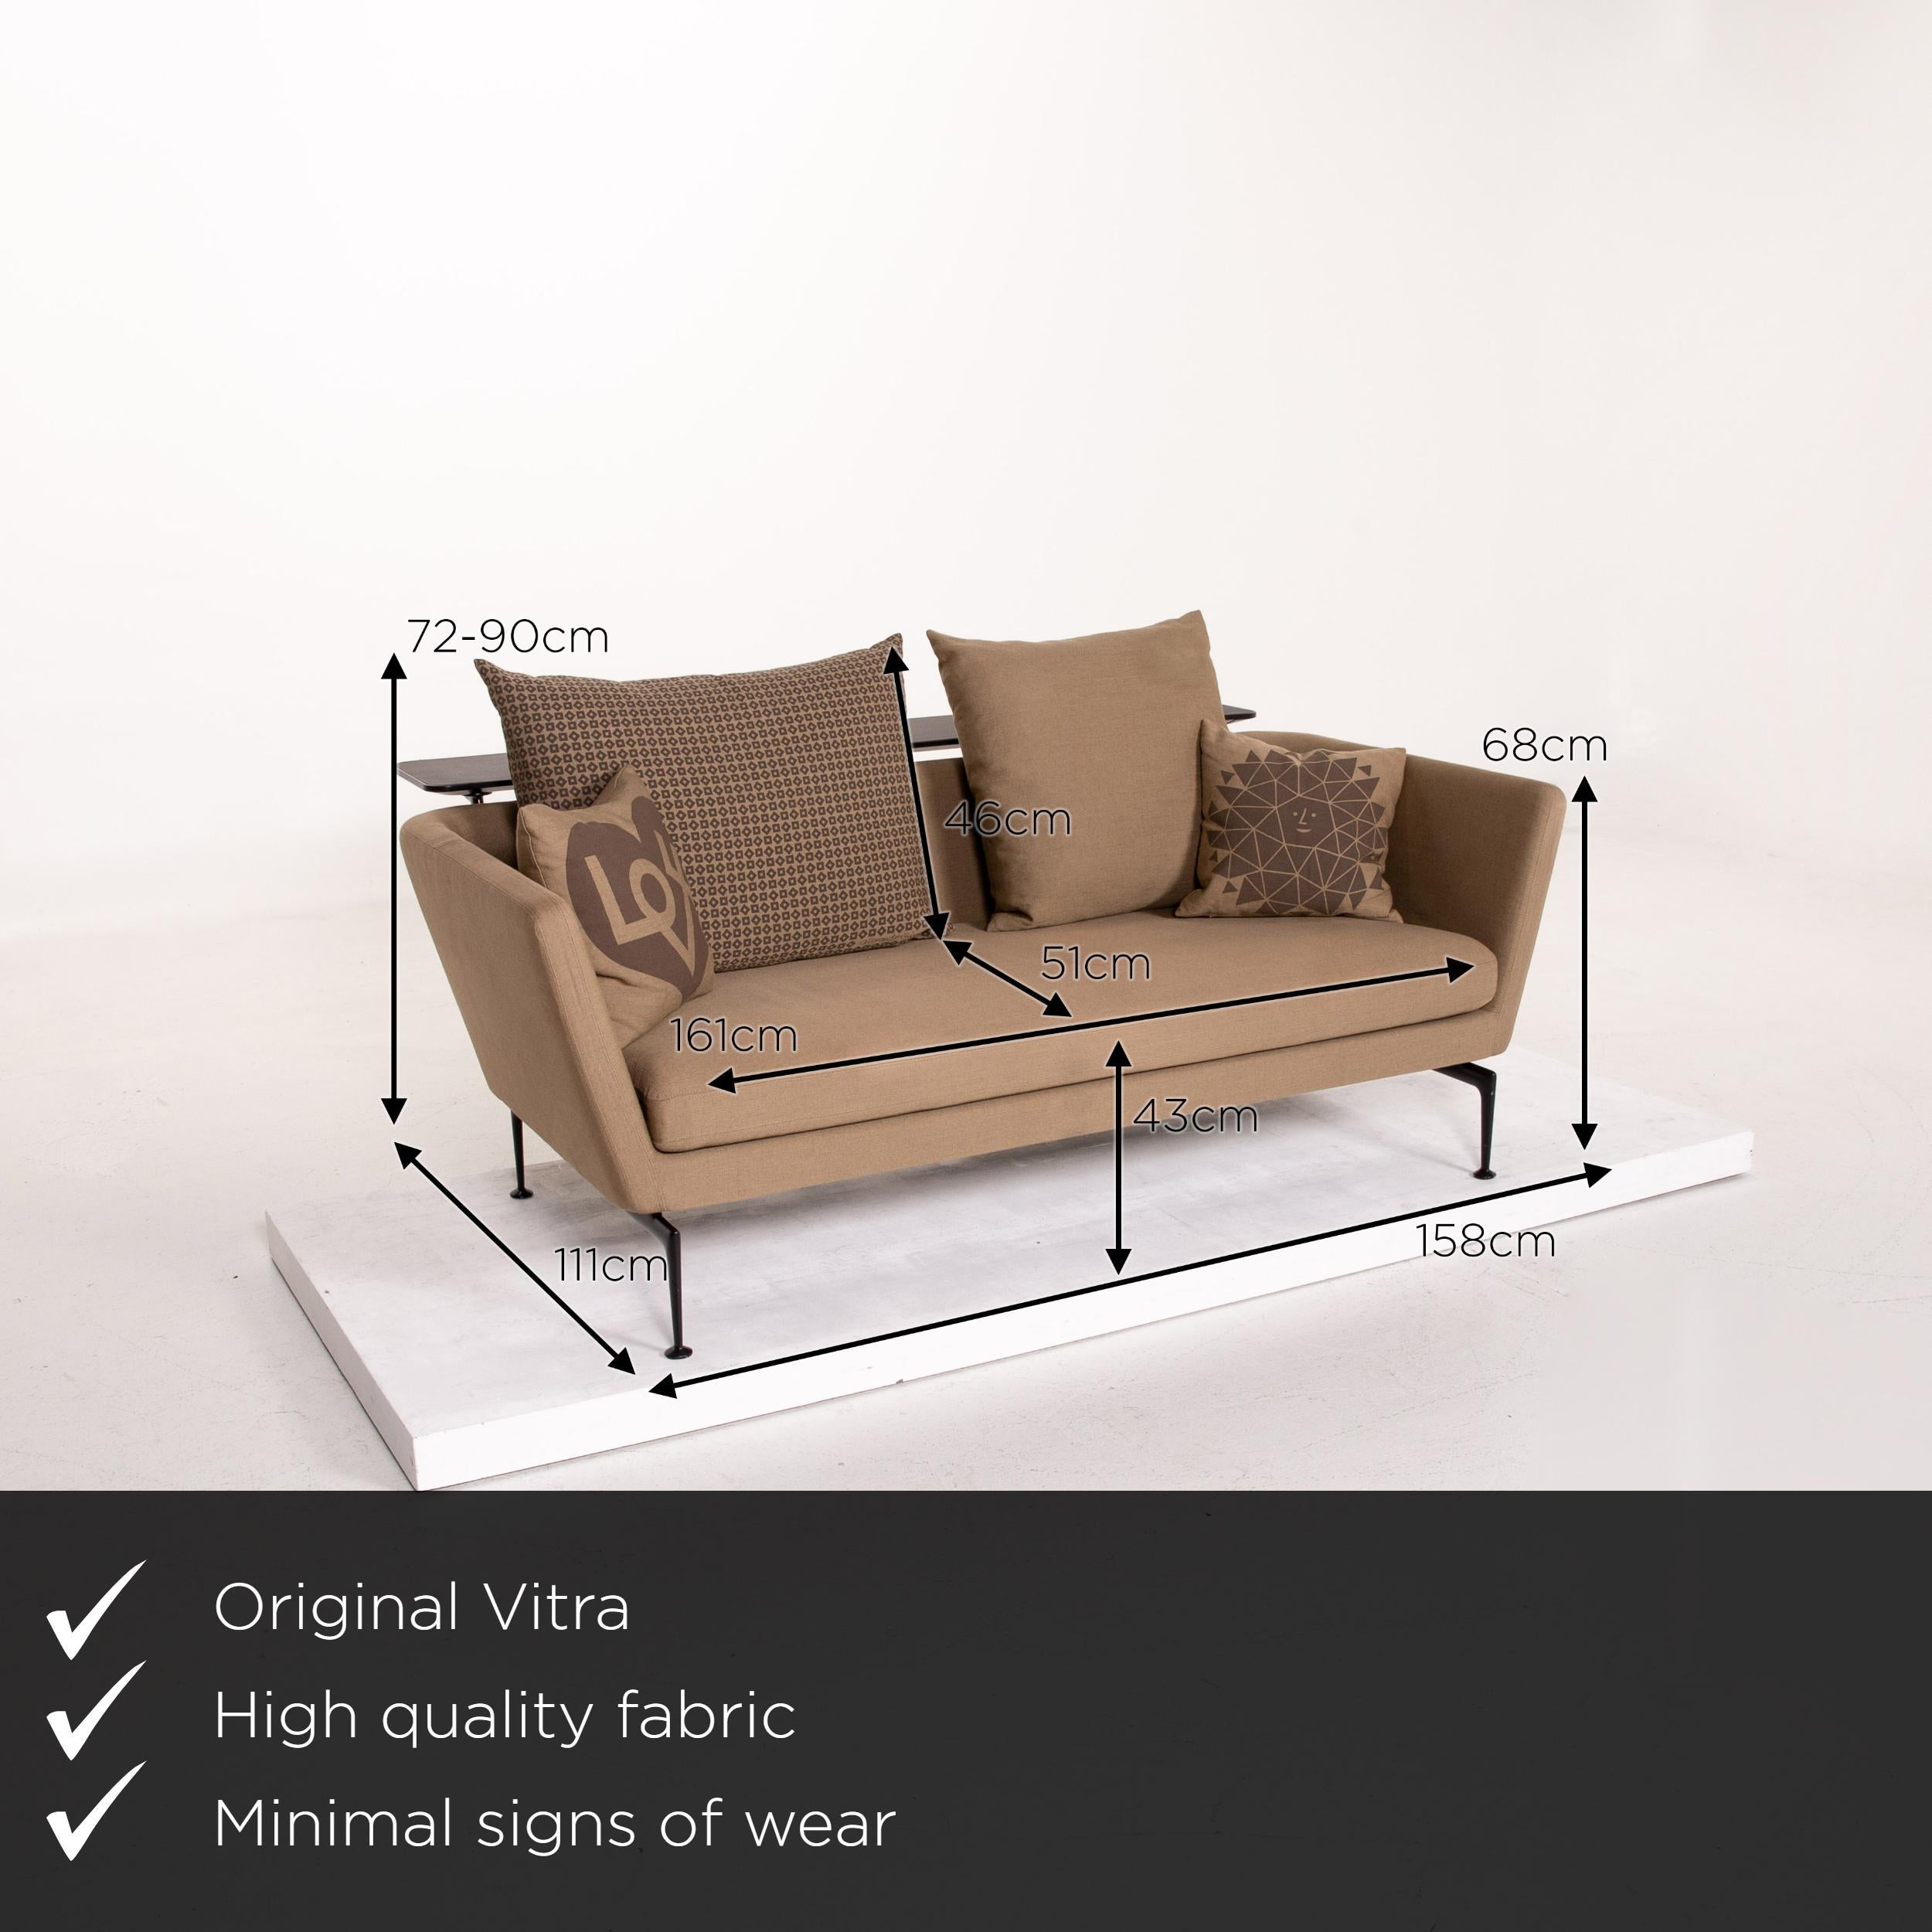 We present to you a Vitra Suita fabric sofa brown light brown Ocher two-seat Antonio Citterio.
 

 Product measurements in centimeters:
 

Depth 111
Width 158
Height 90
Seat height 43
Rest height 68
Seat depth 51
Seat width 161
Back